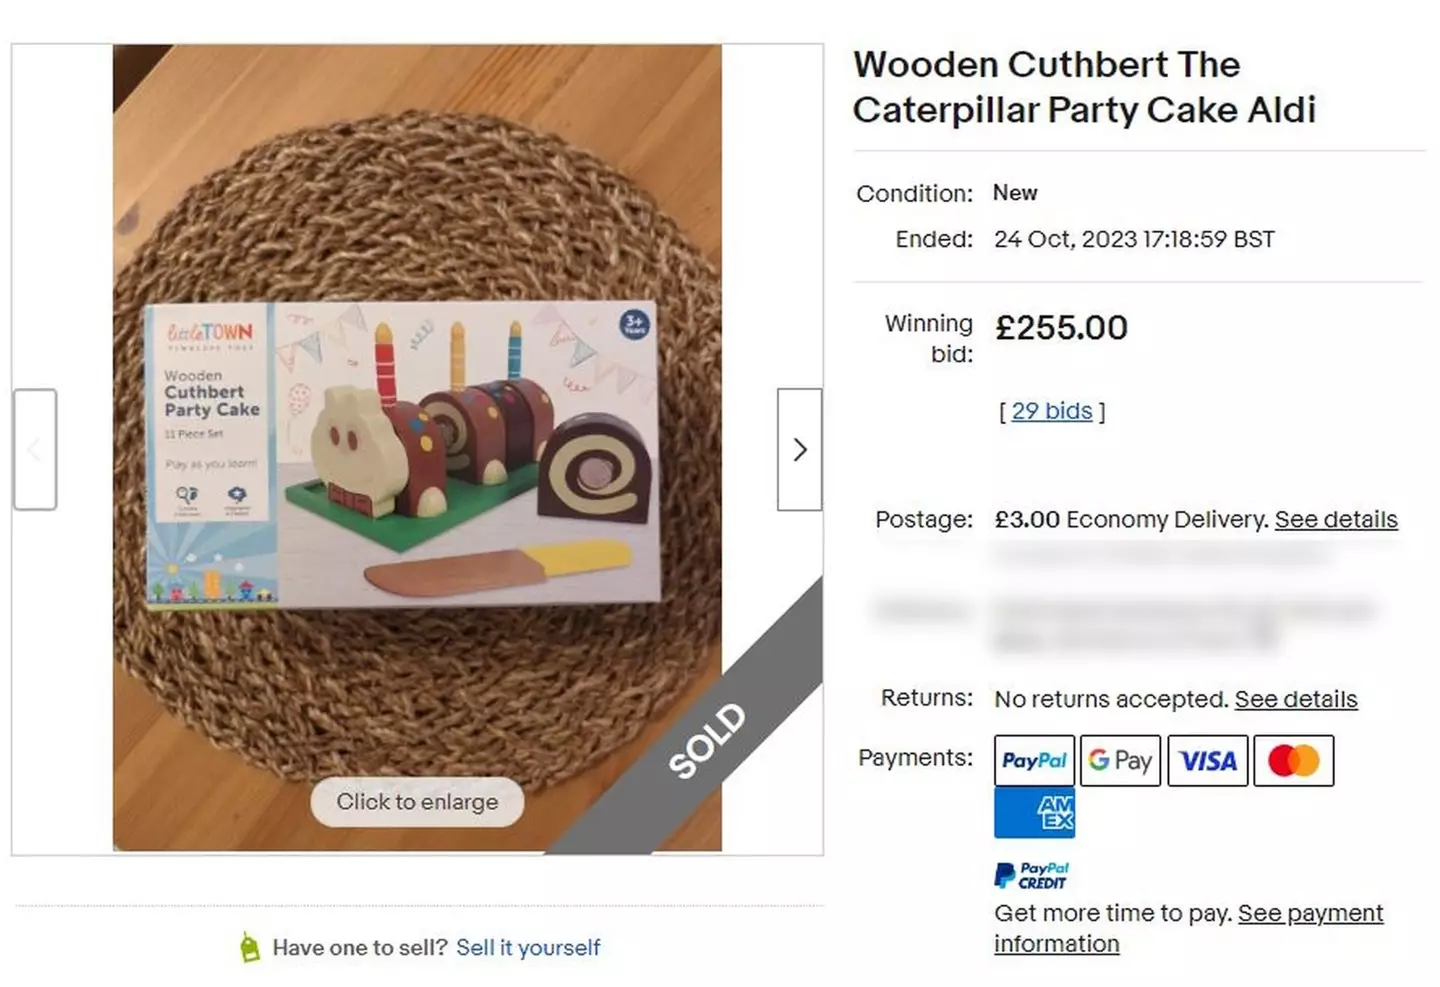 One toy was being sold for over £200.